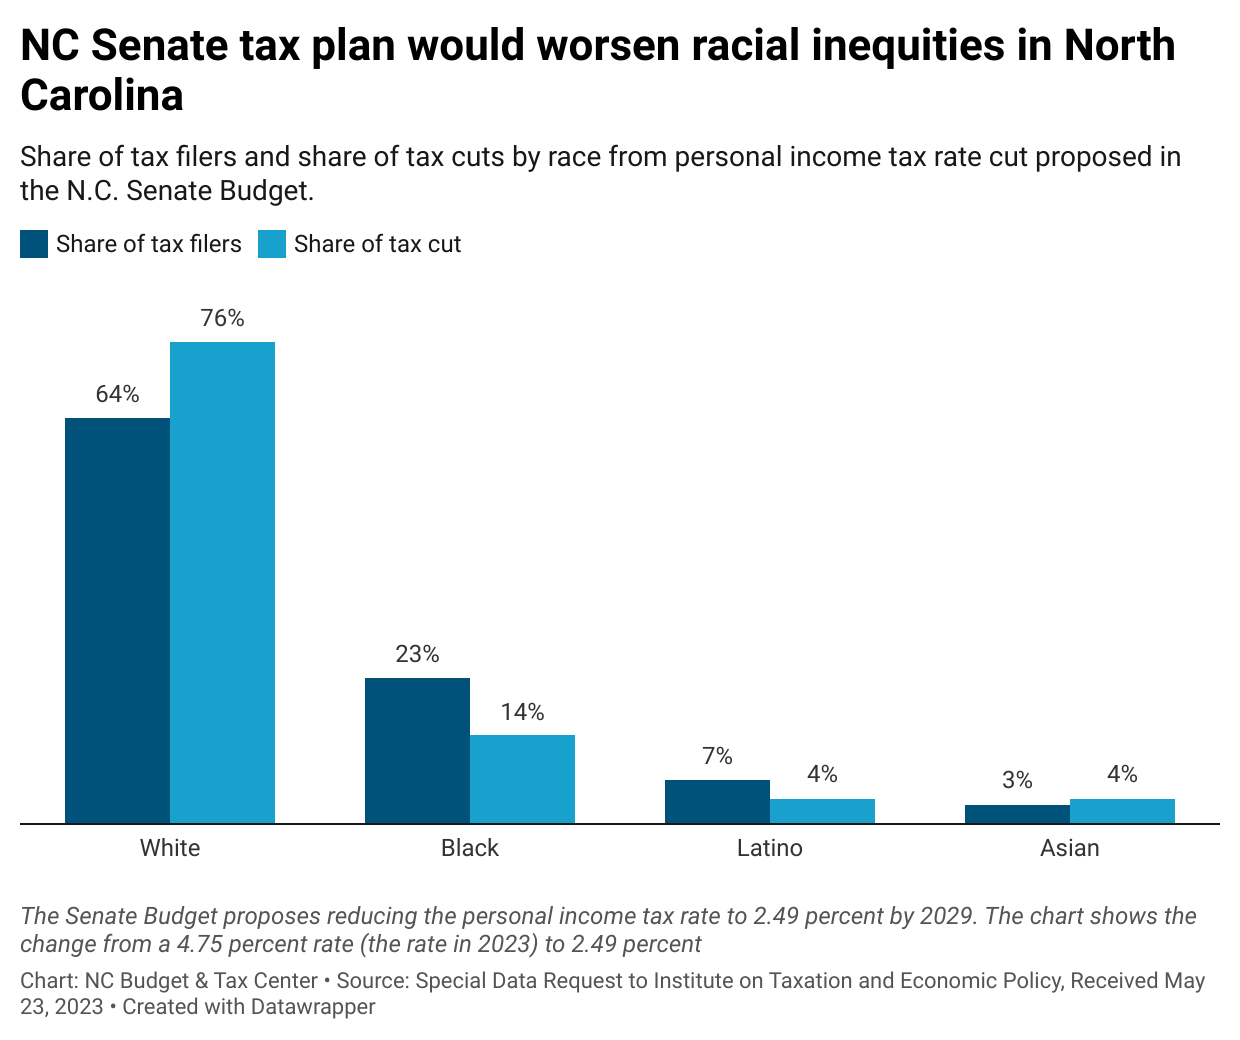 Share of tax filers and share of tax cuts by race from personal income tax rate cut proposed in the N.C. Senate Budget.